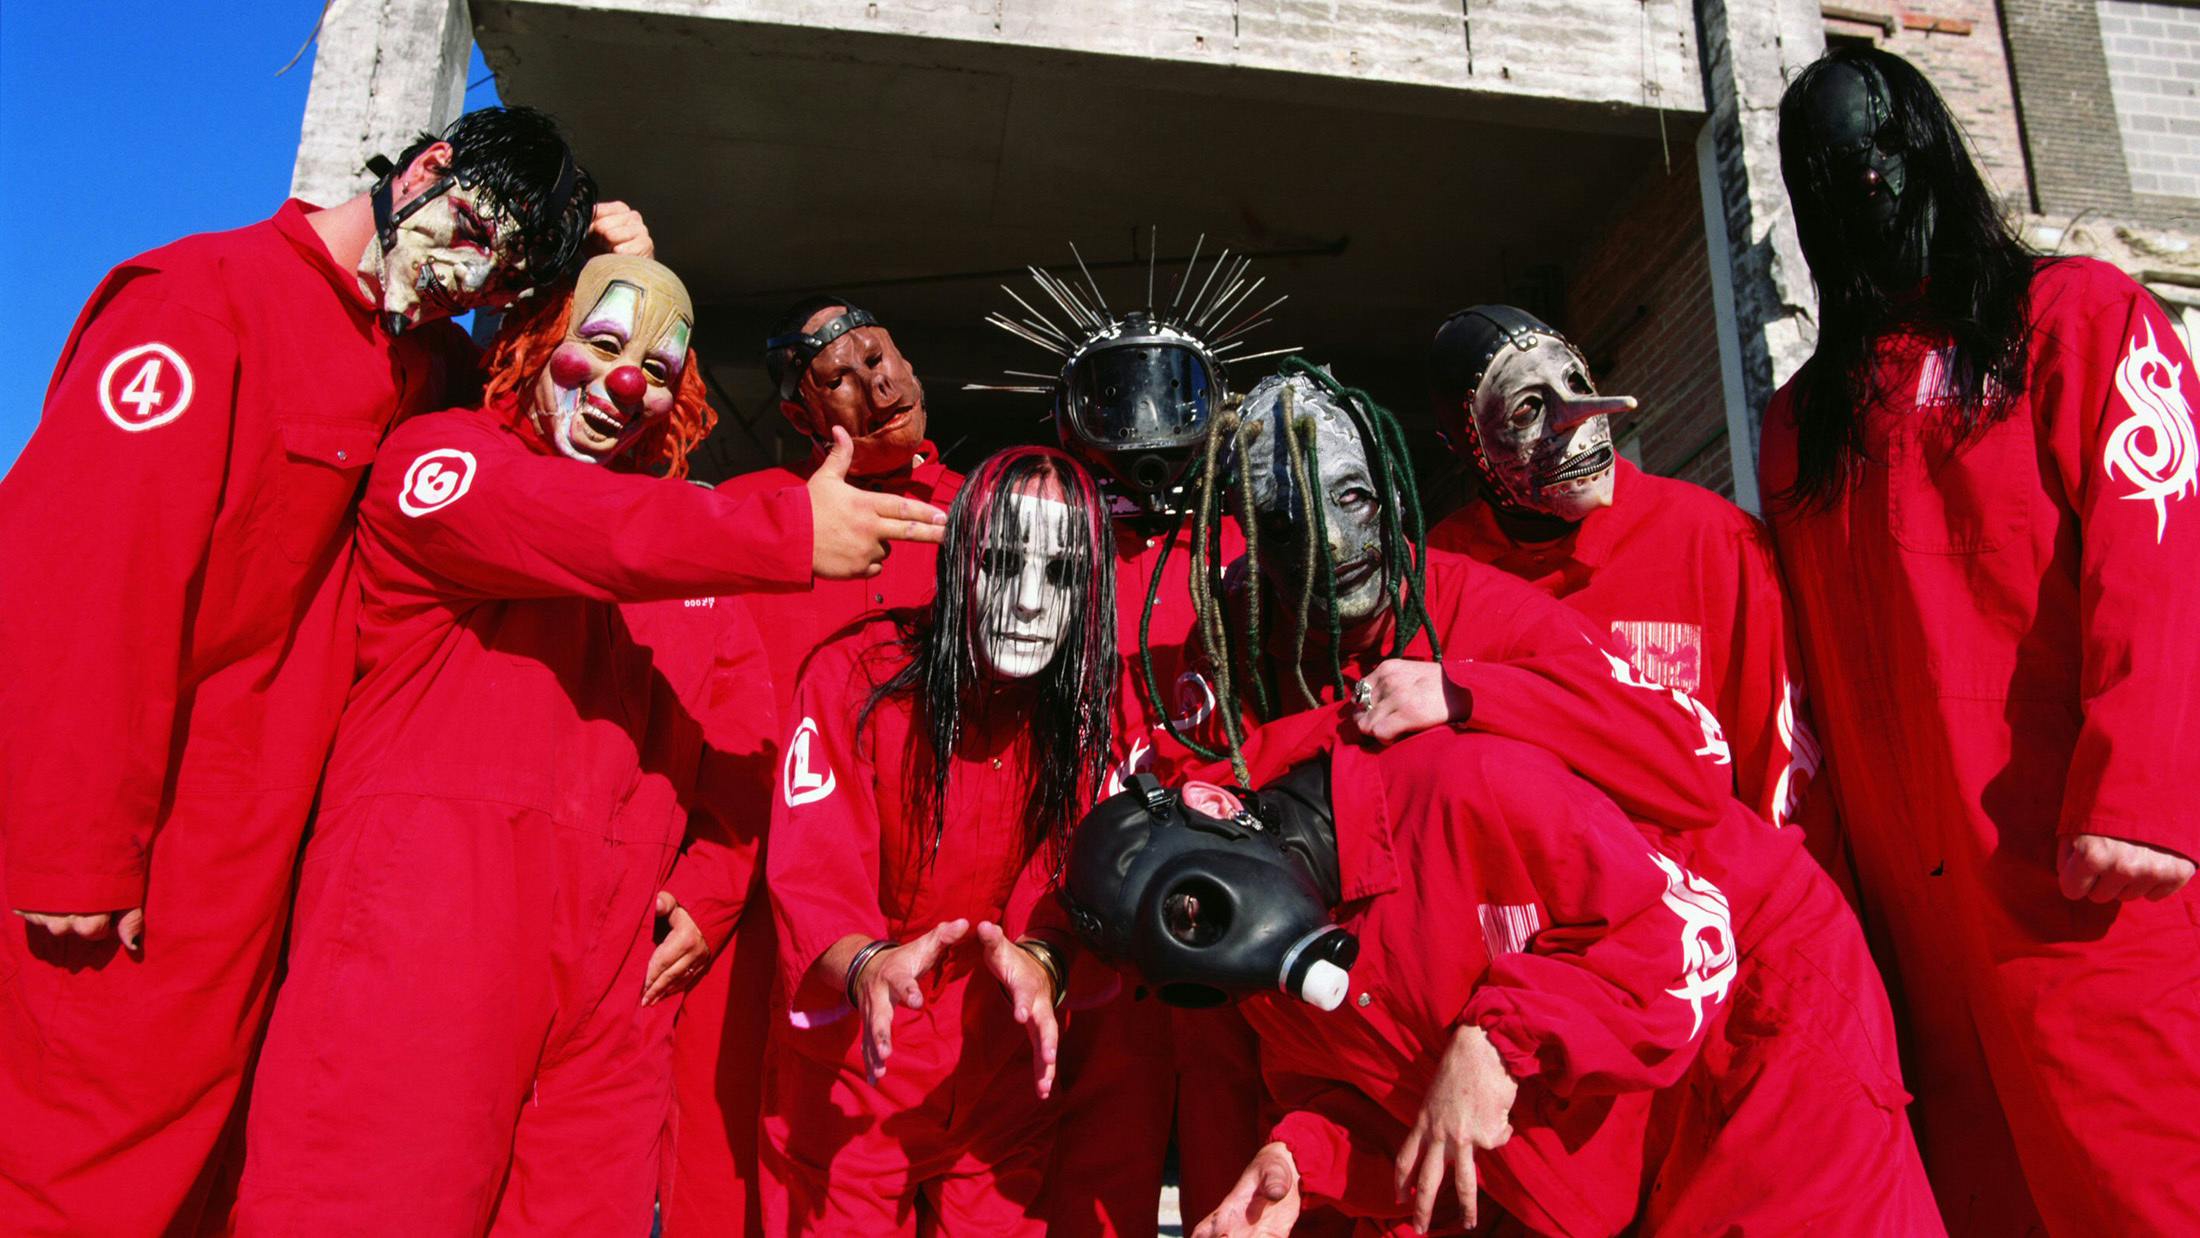 'The whole thing, I think it's sick': The origin of Slipknot's iconic sample